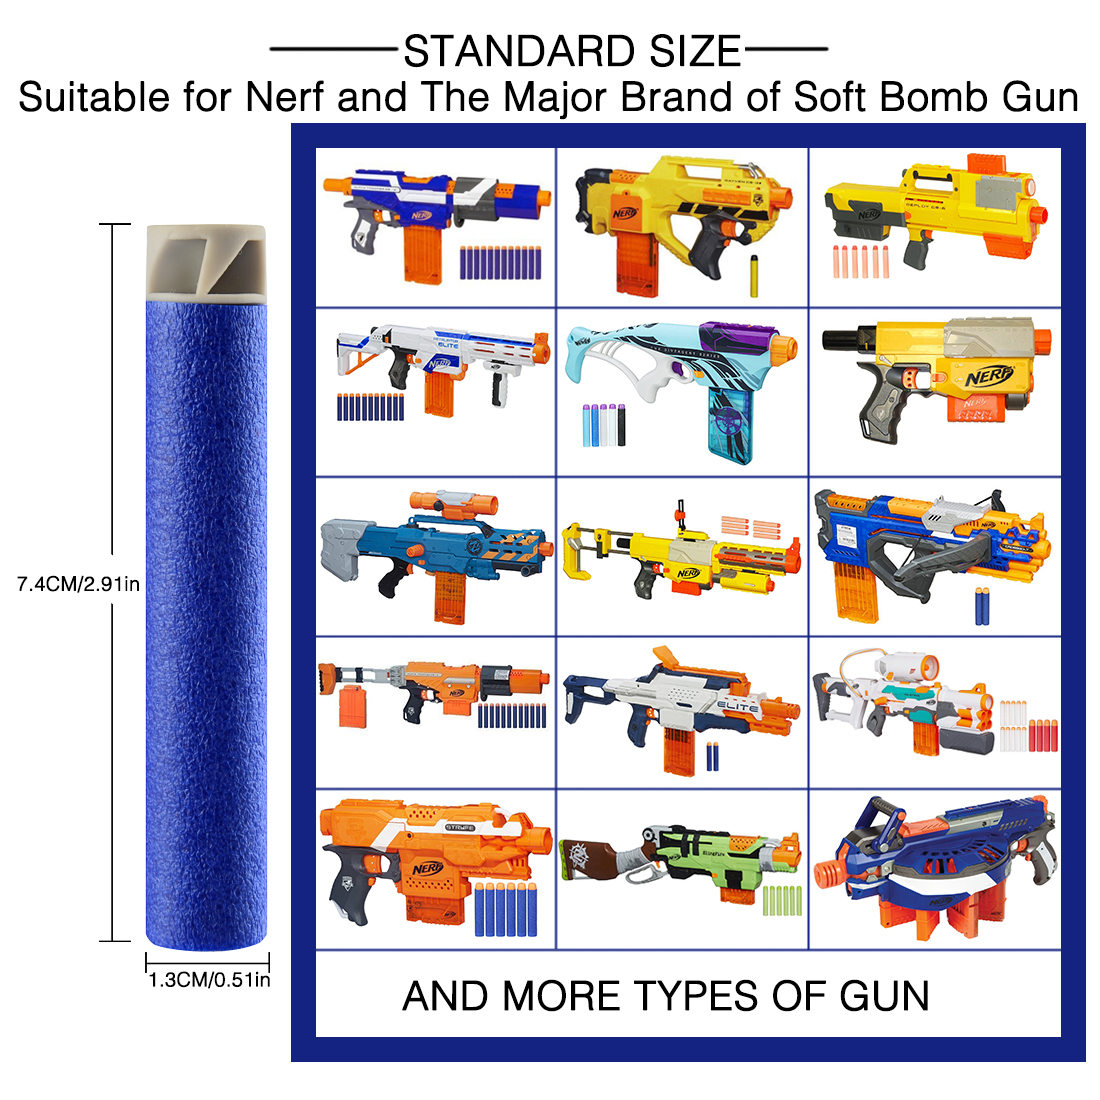 300PCS For Nerf Bullets Soft Hollow Hole Head 7.4cm Refill Darts Toy Gun Bullets for Nerf Series Blasters Xmas Kid Children Gift